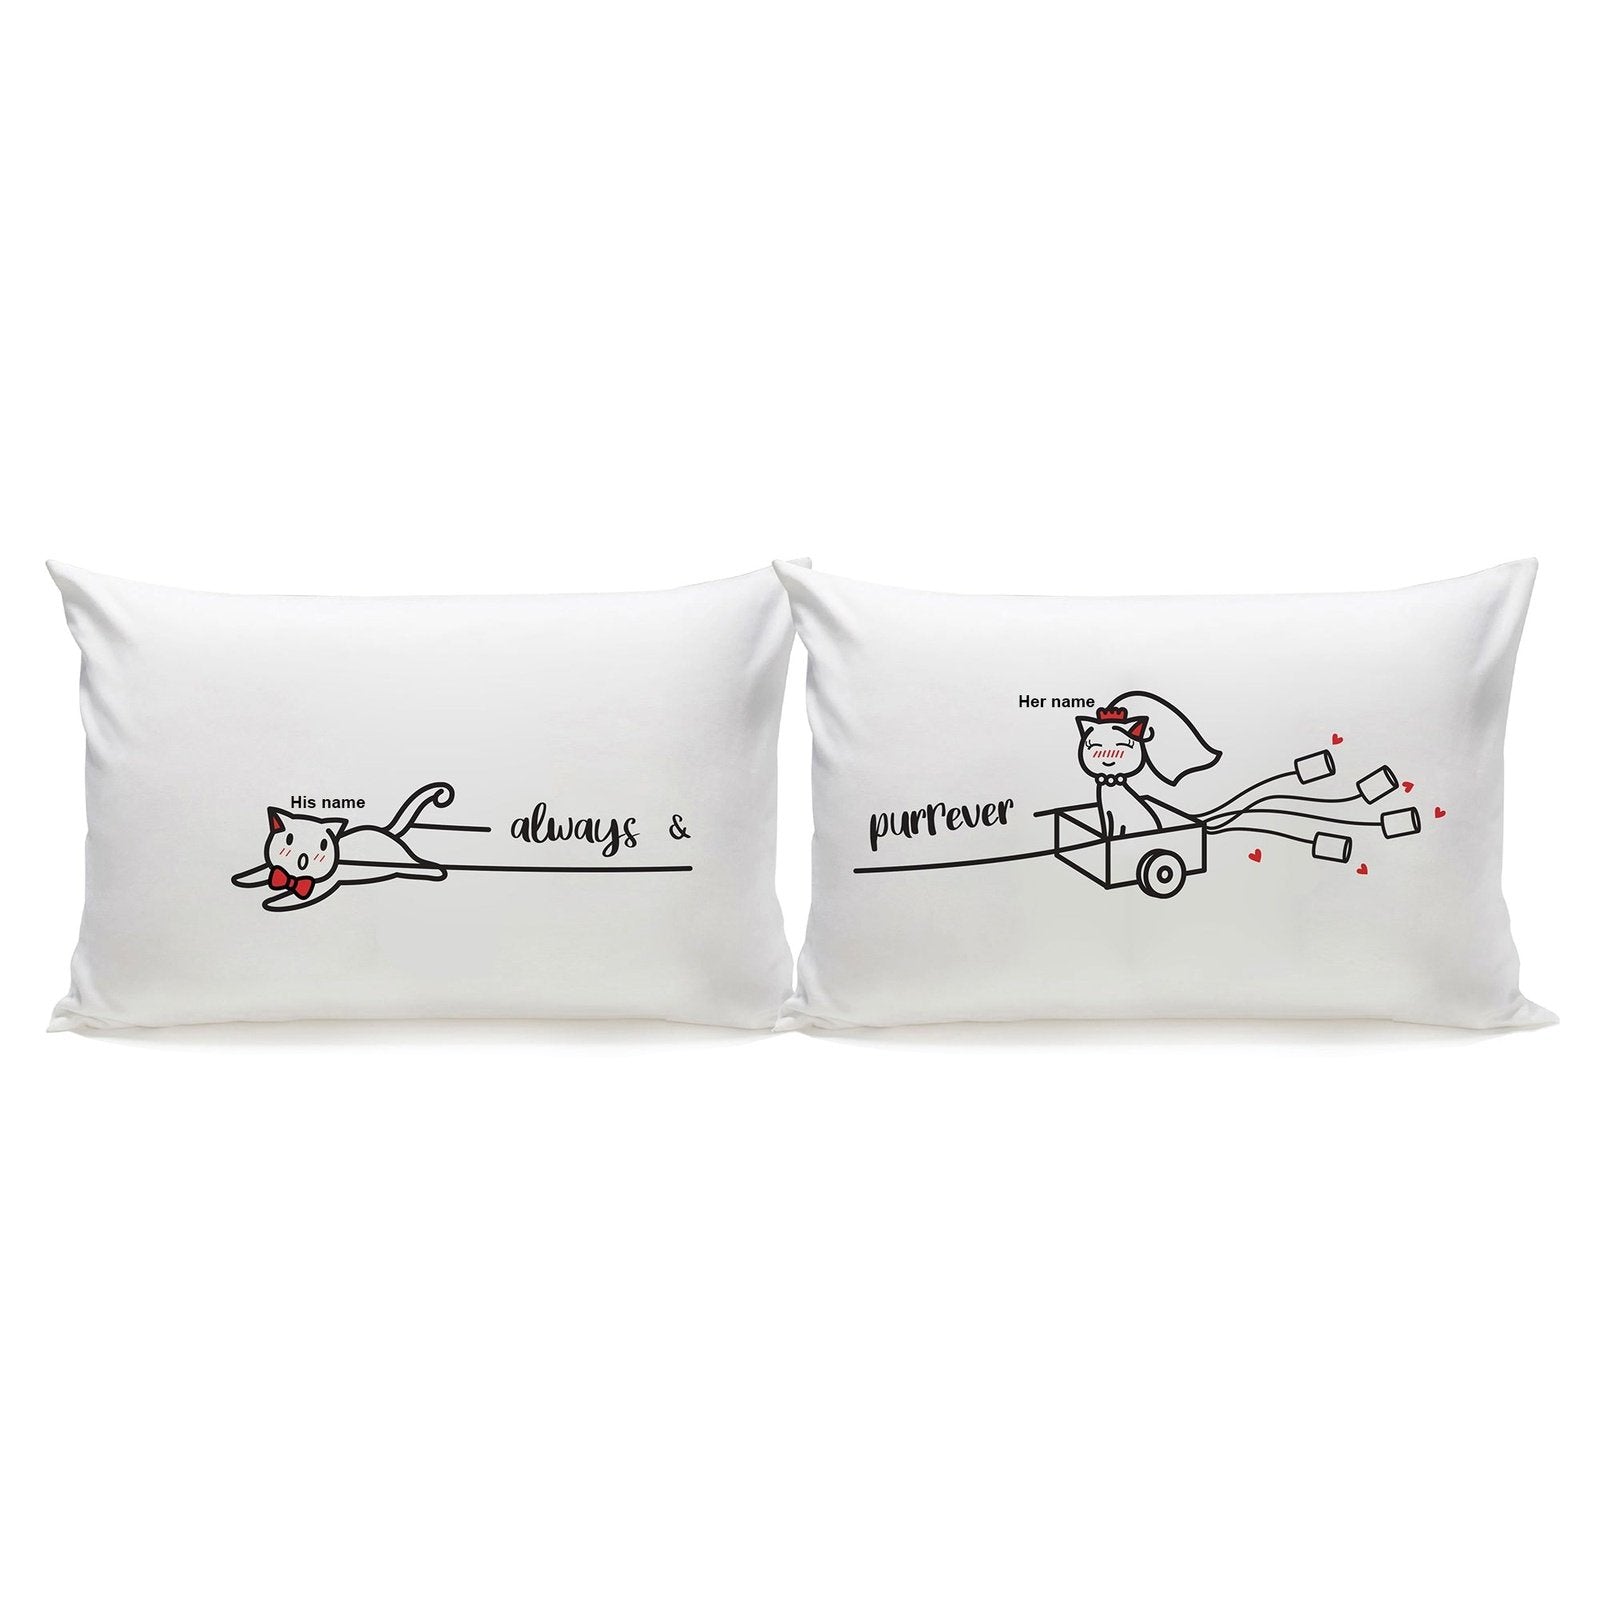 How about Customized with delightful drawings, these couple pillows make for a perfect gift thats creative and cute, ideal for anniversaries, him or her!